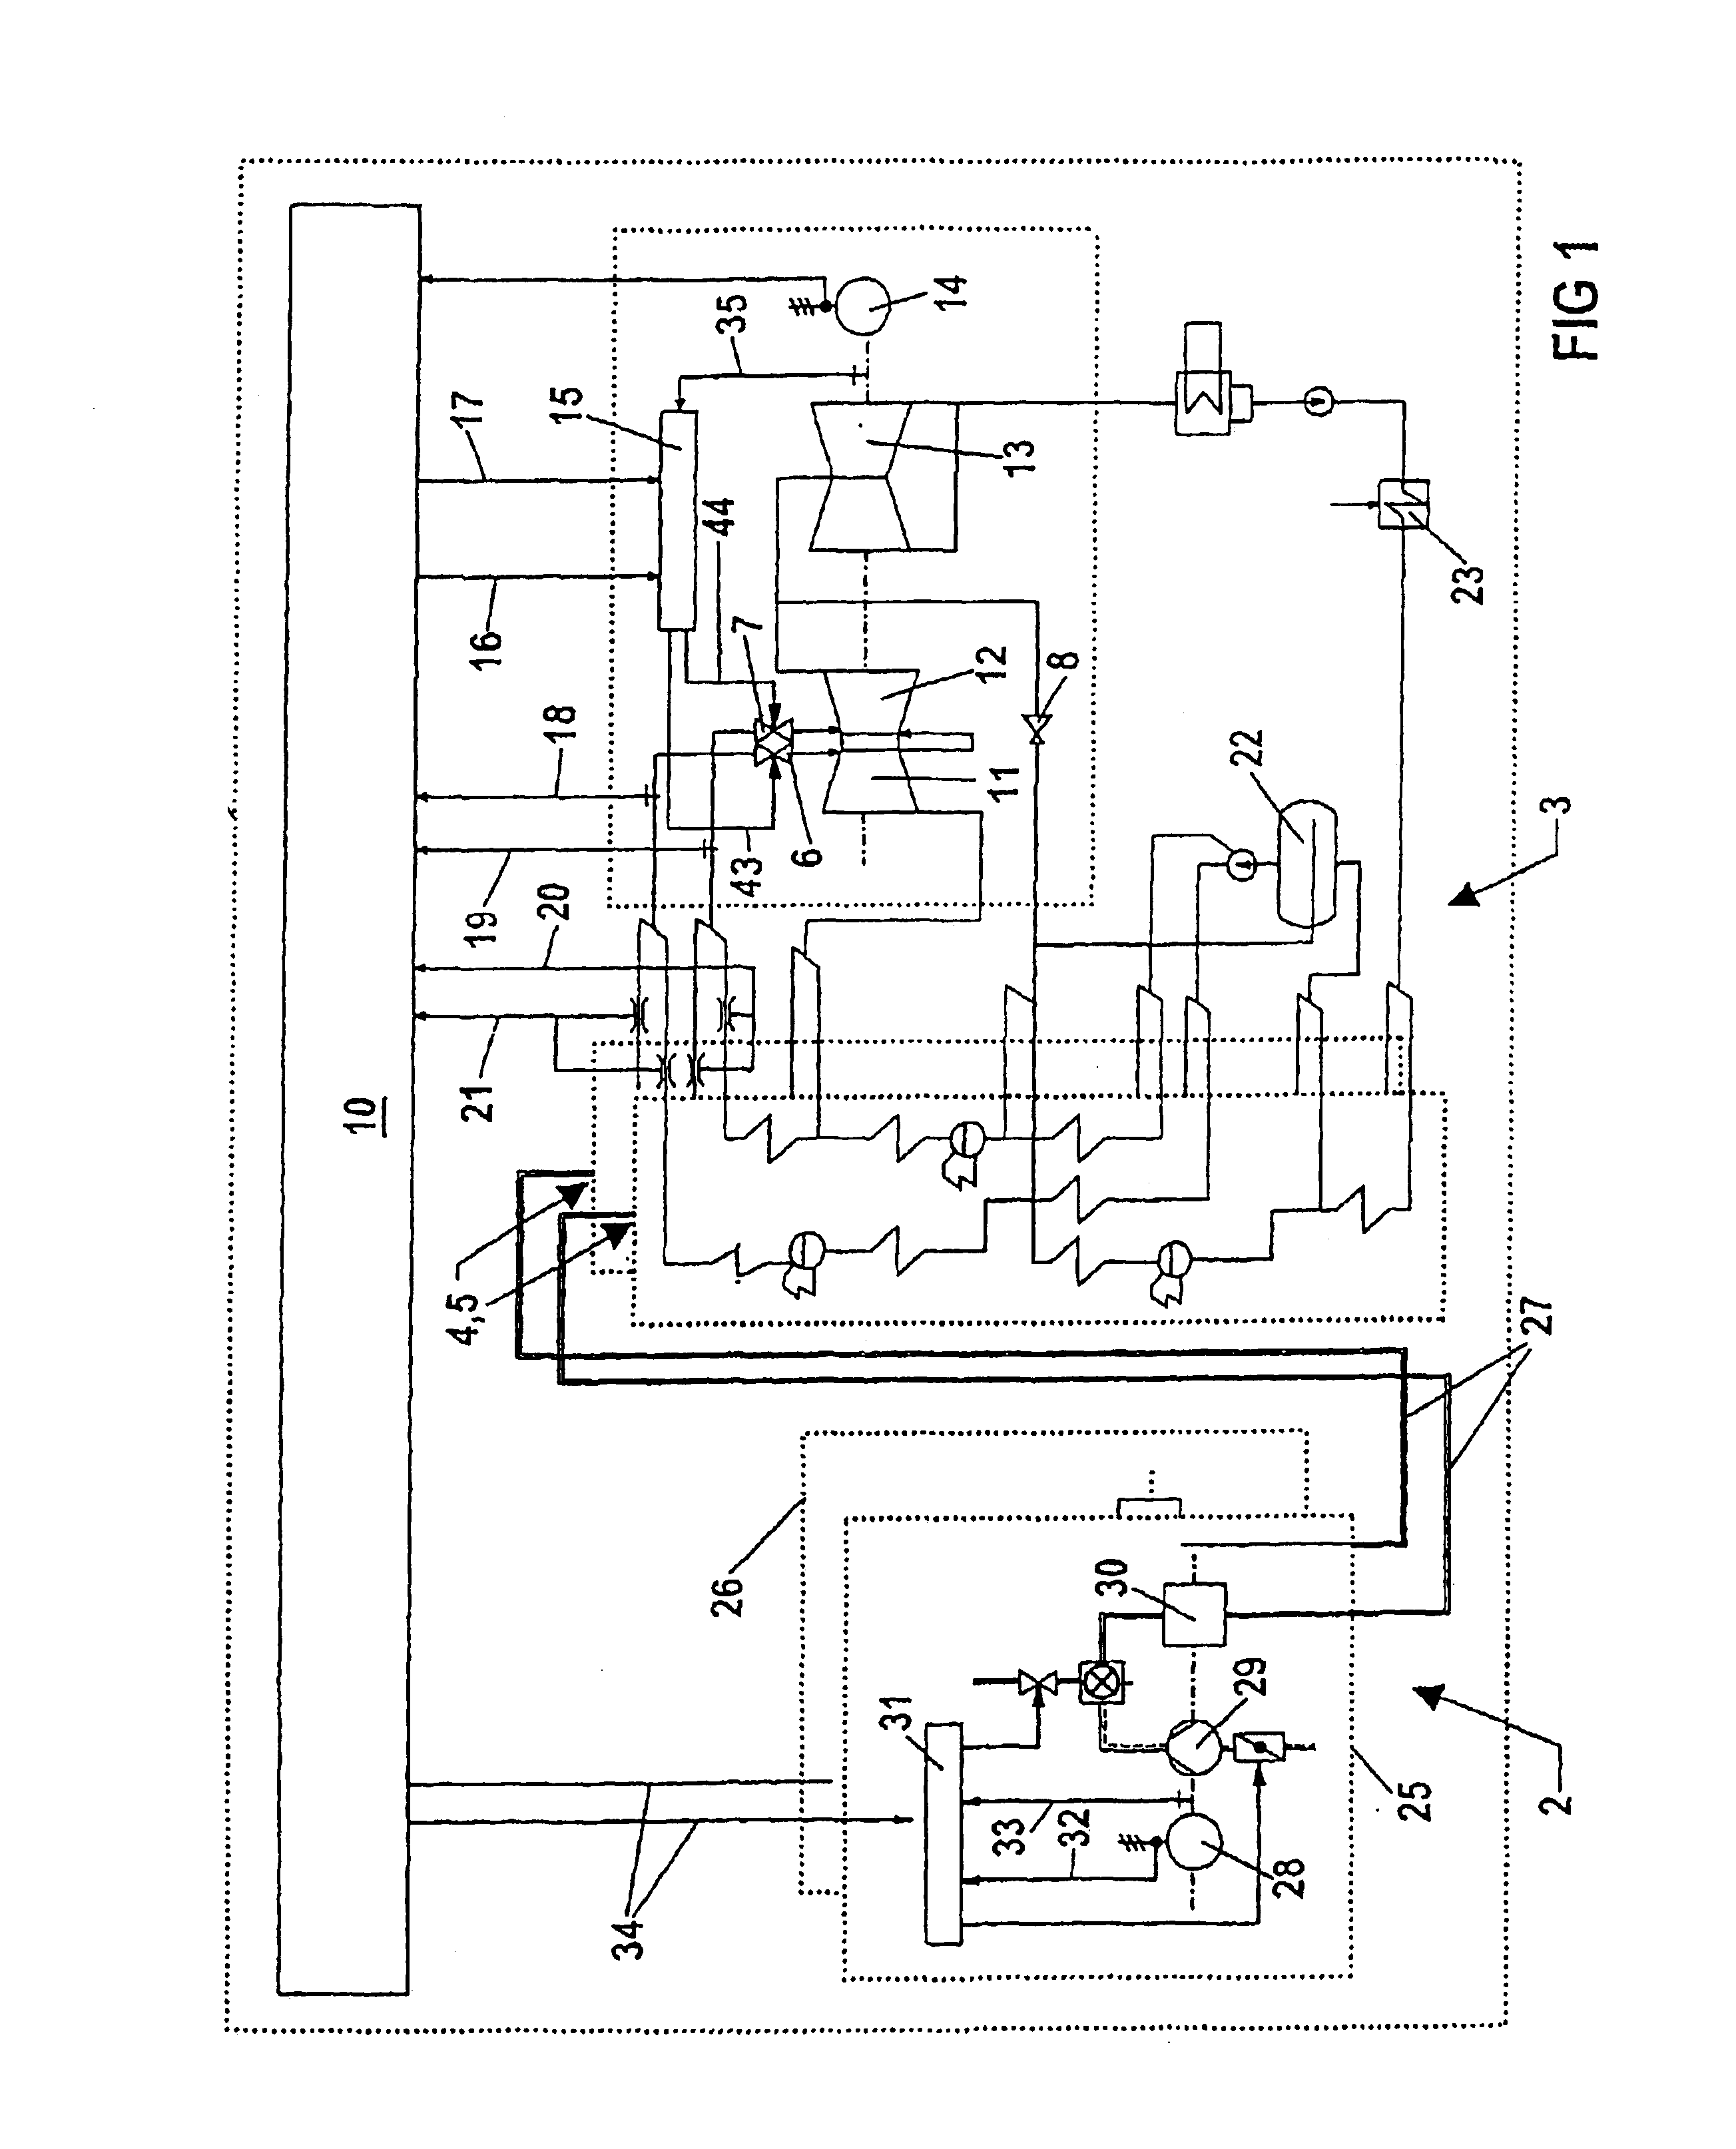 Method for the primary control in a combined gas/steam turbine installation